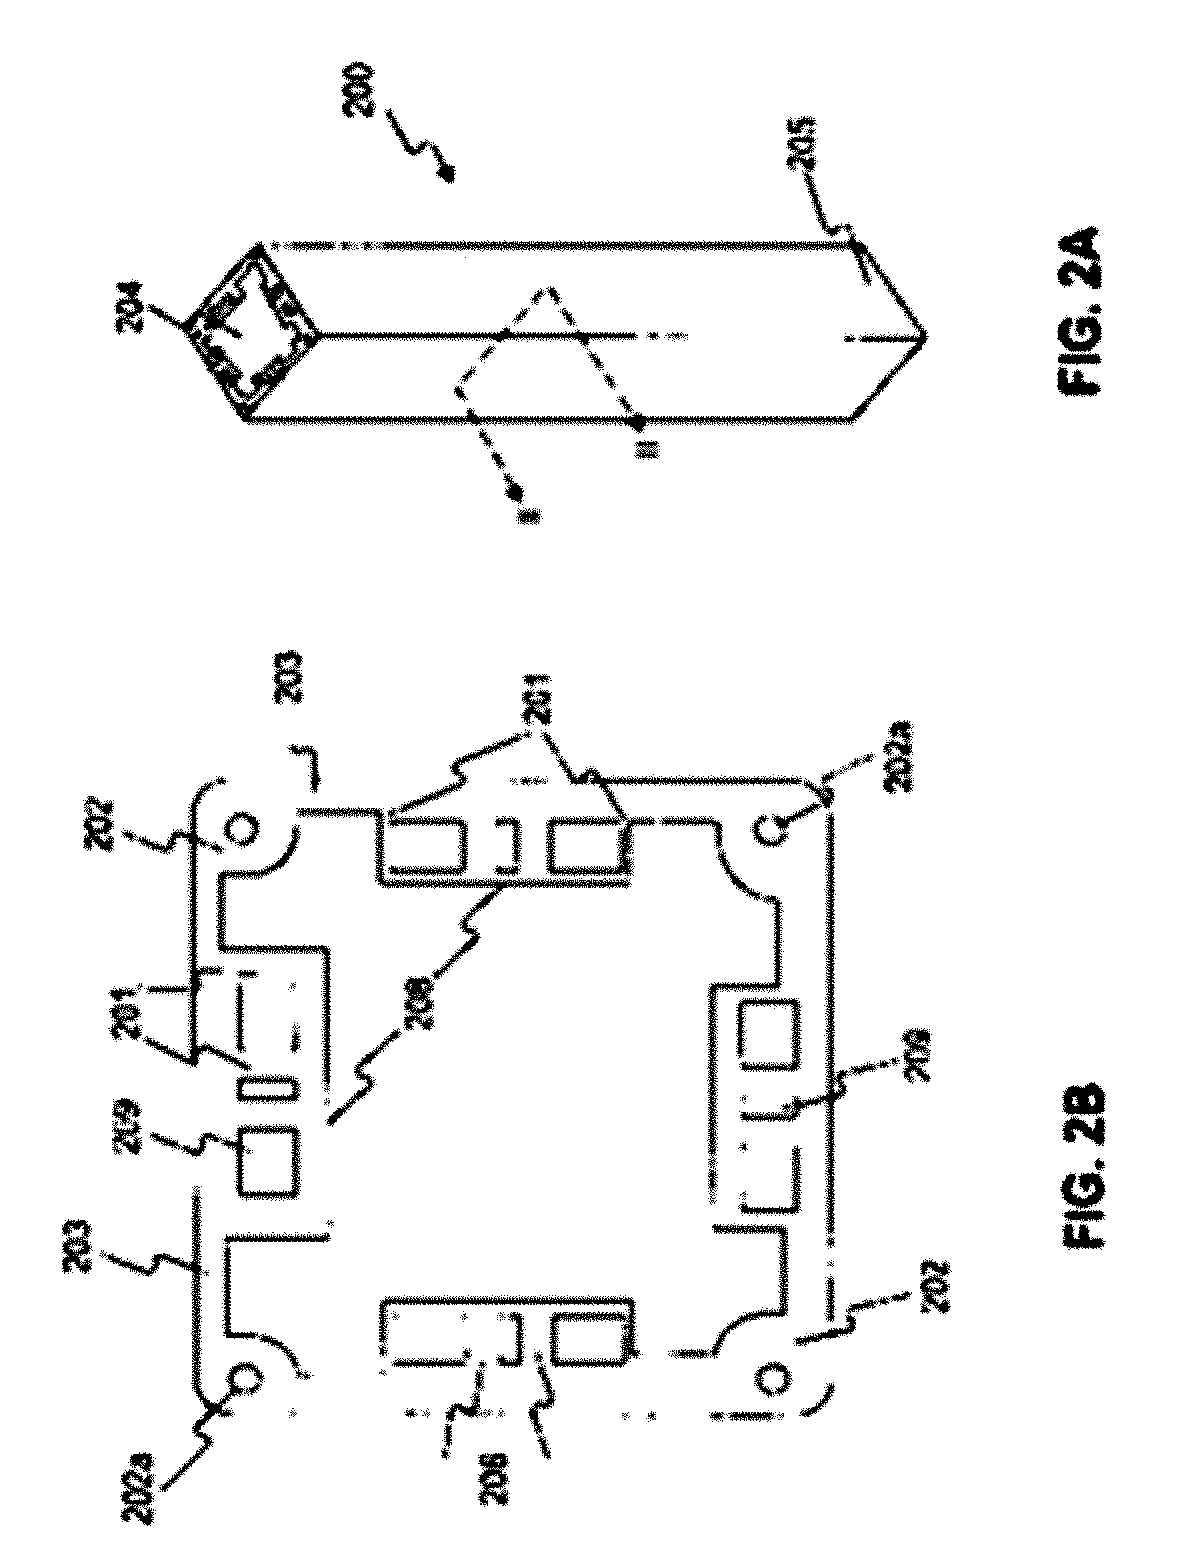 Railing assemblies and related methods and apparatuses